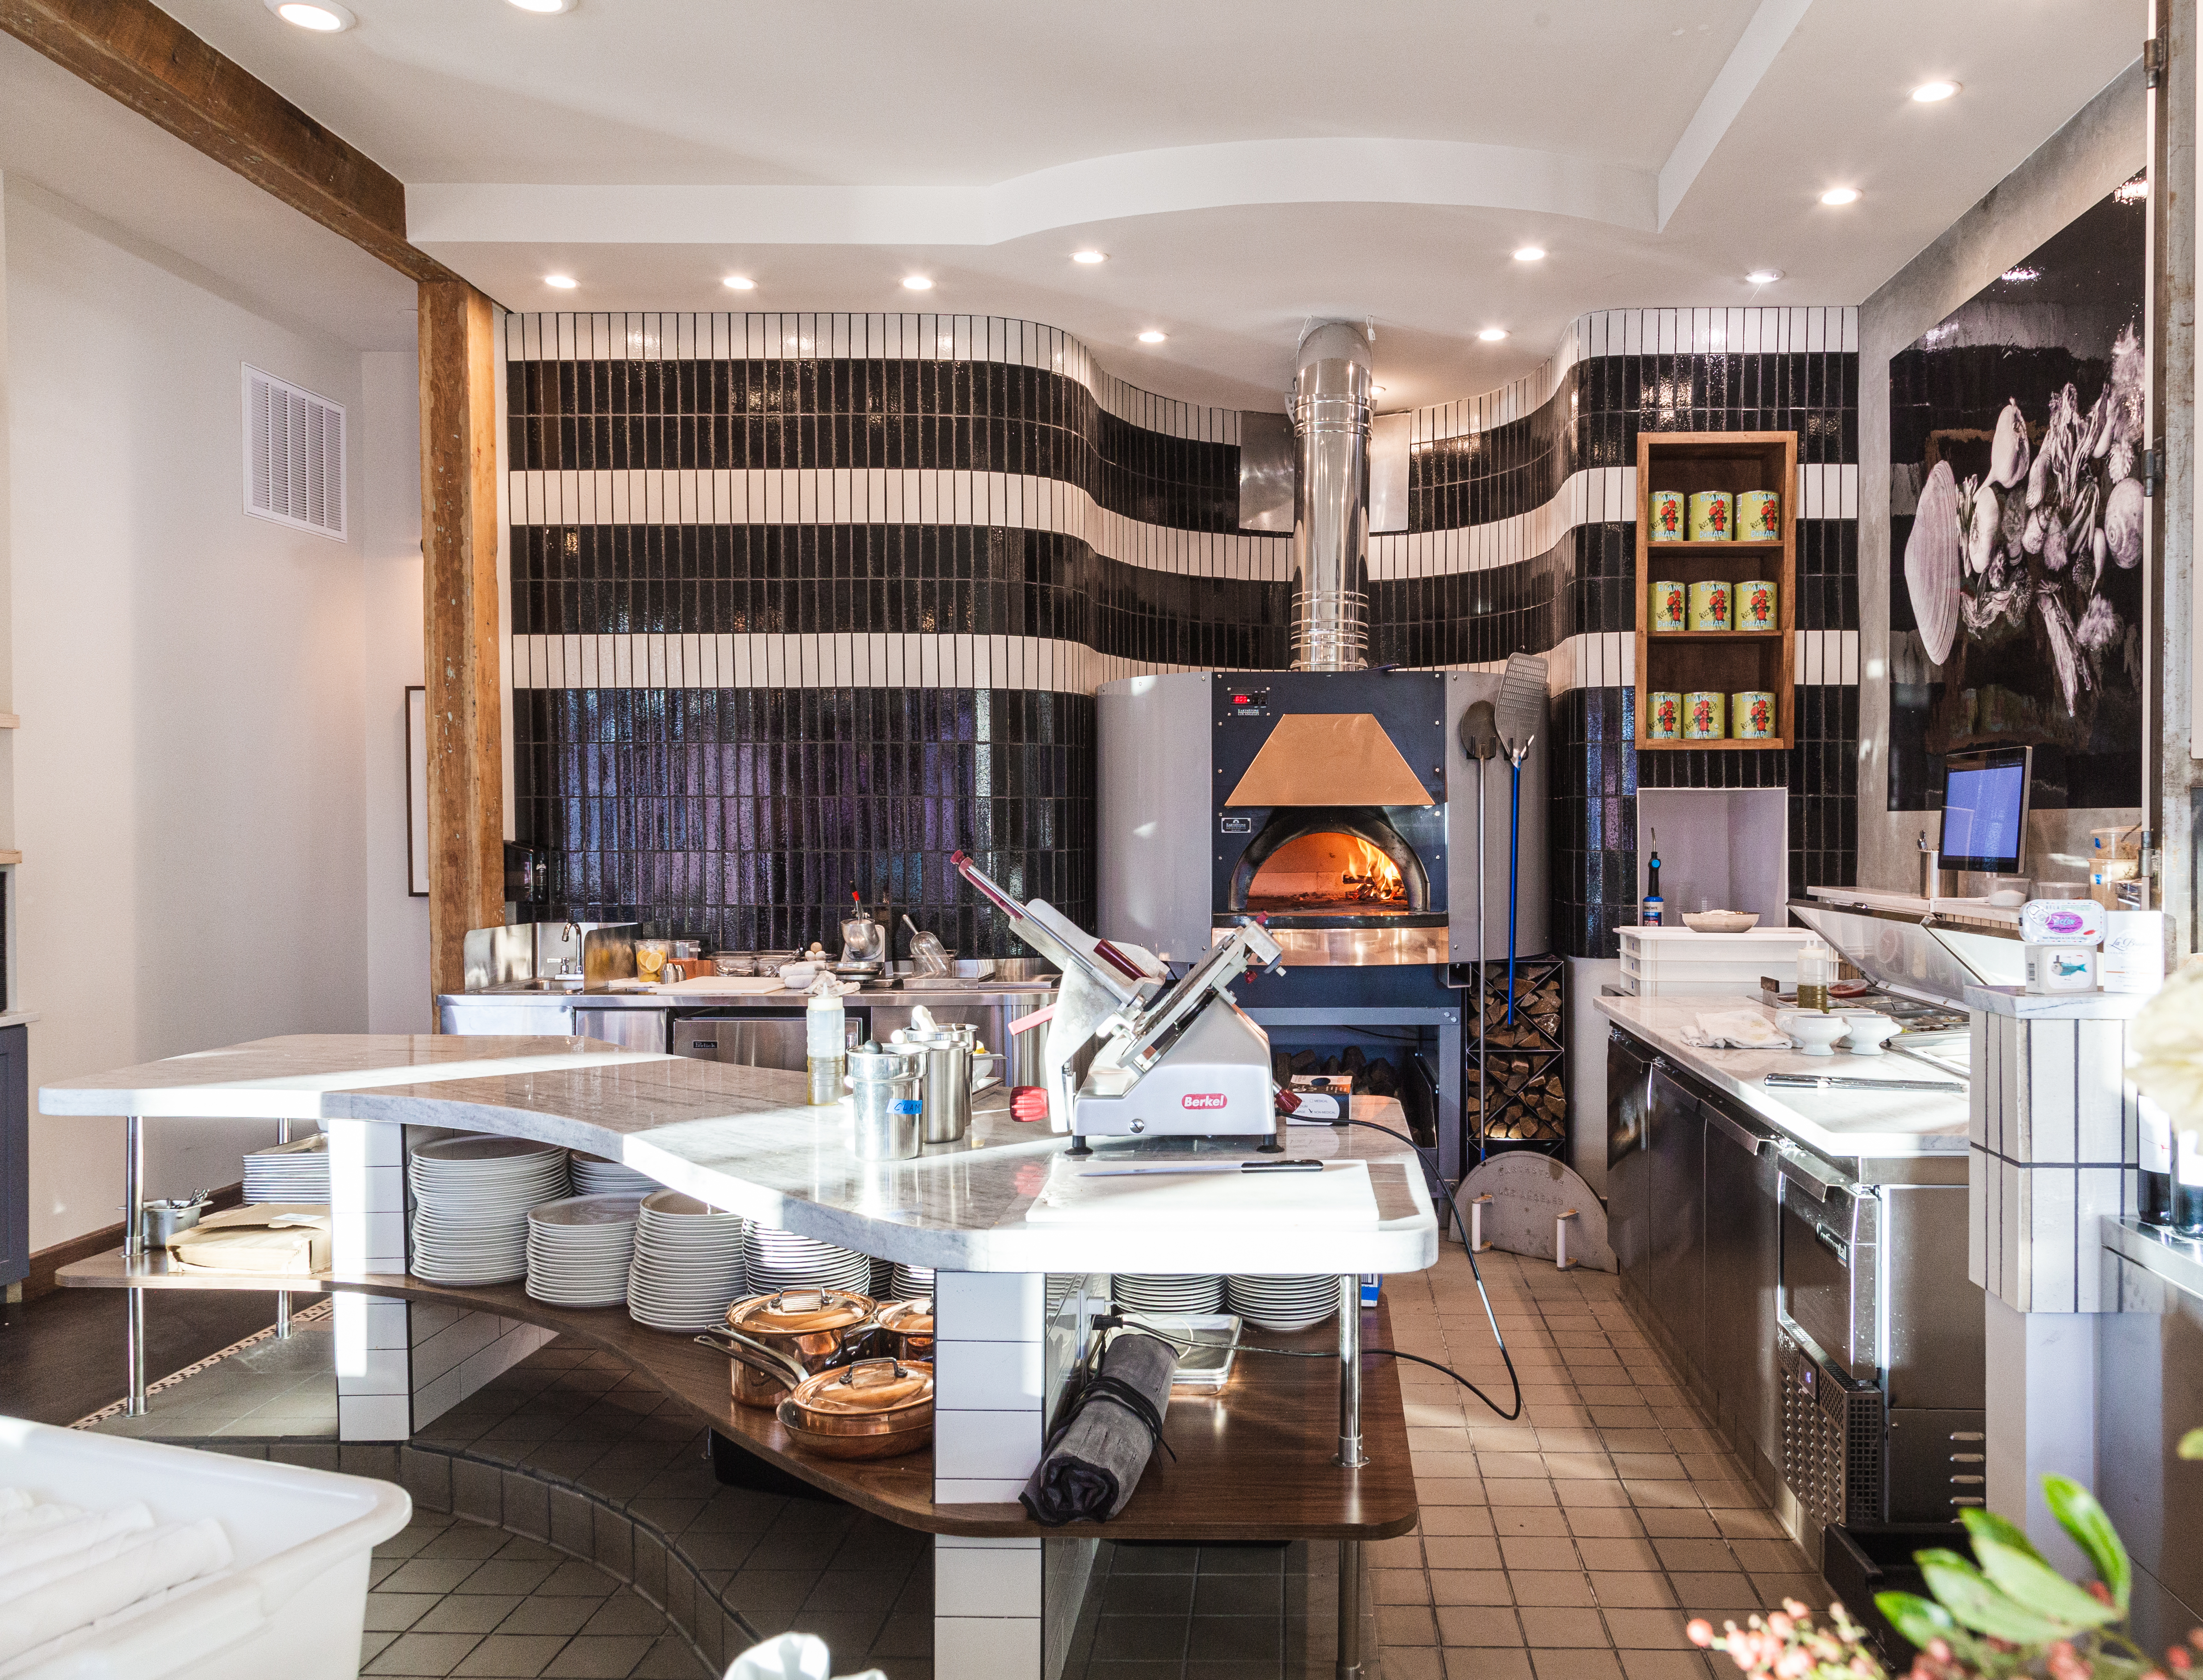 Open concept restaurant kitchen with wood fired pizza oven